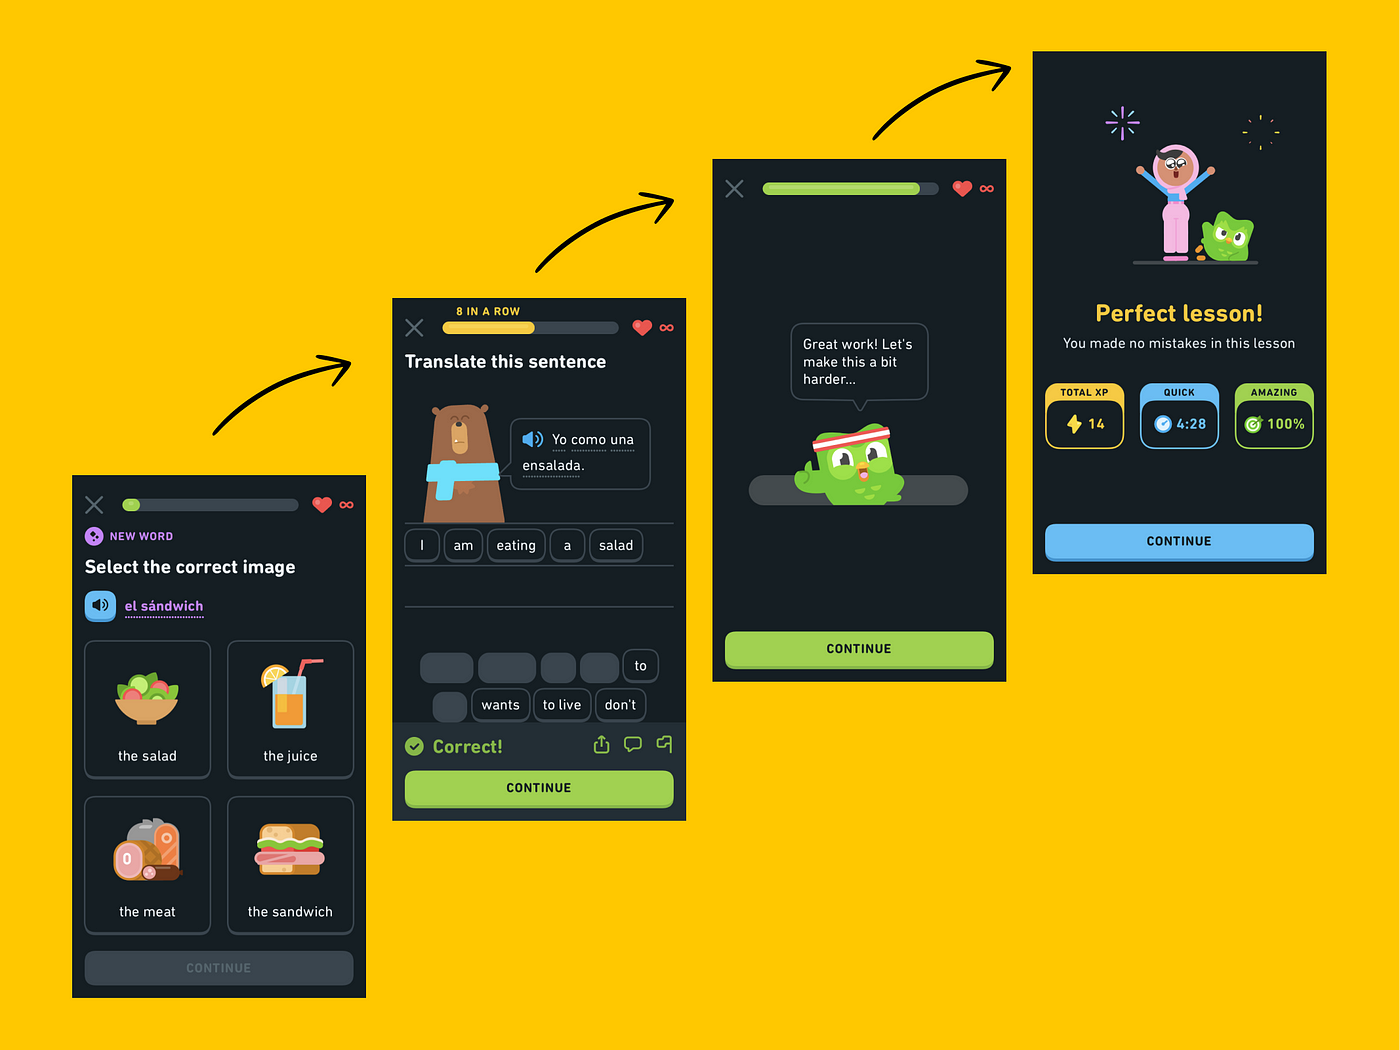 Gamification applied in Duolingo mobile application